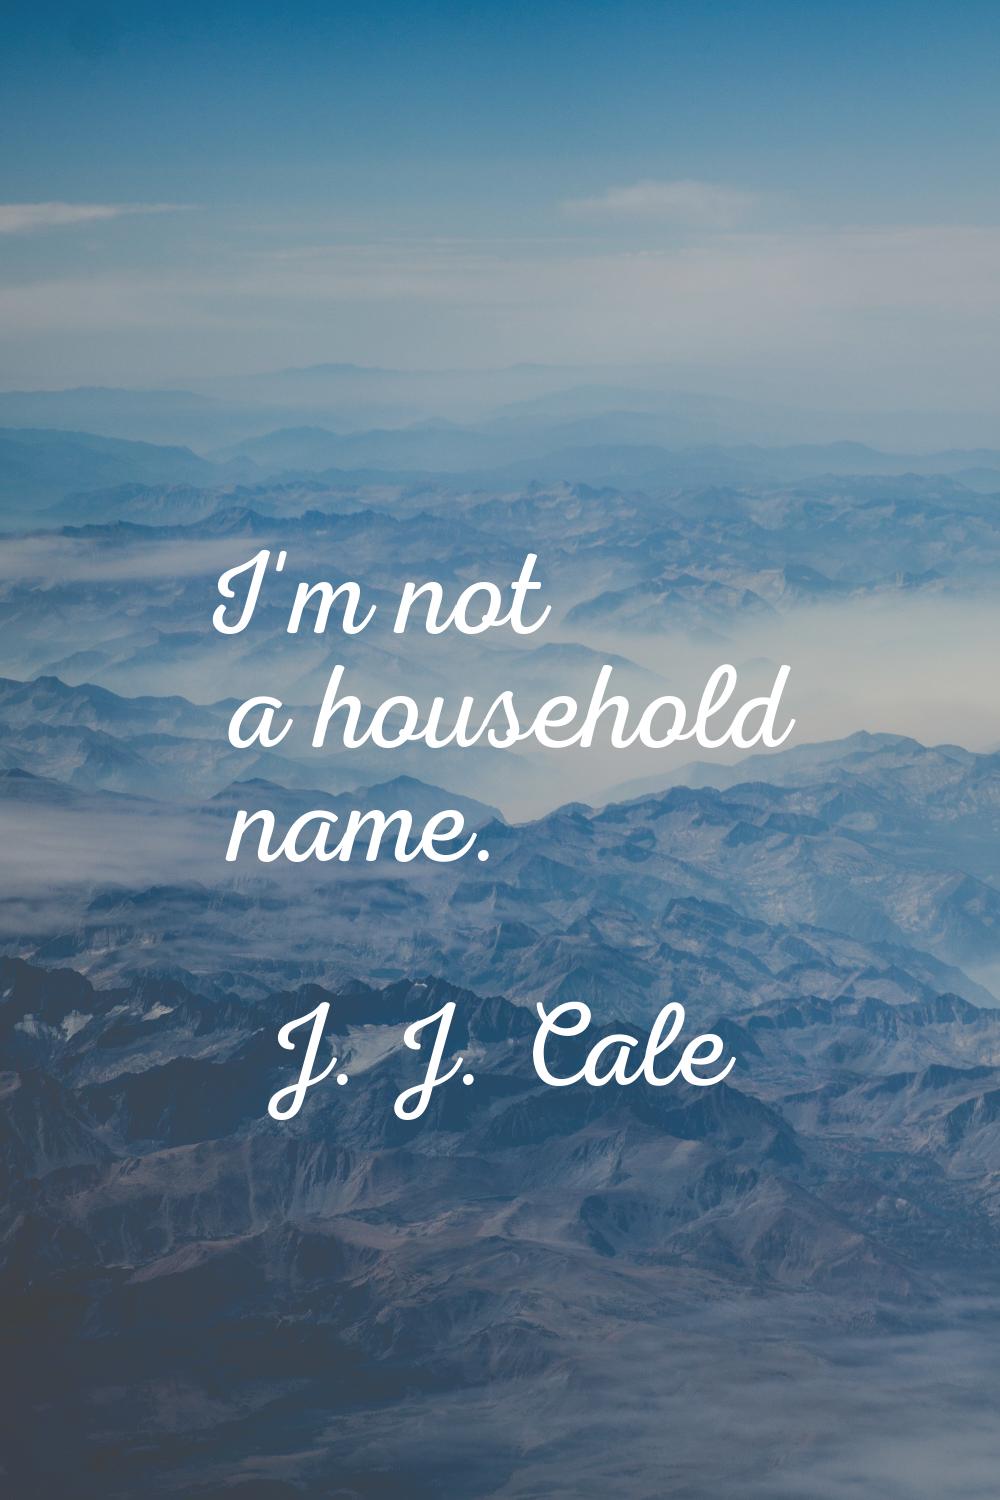 I'm not a household name.